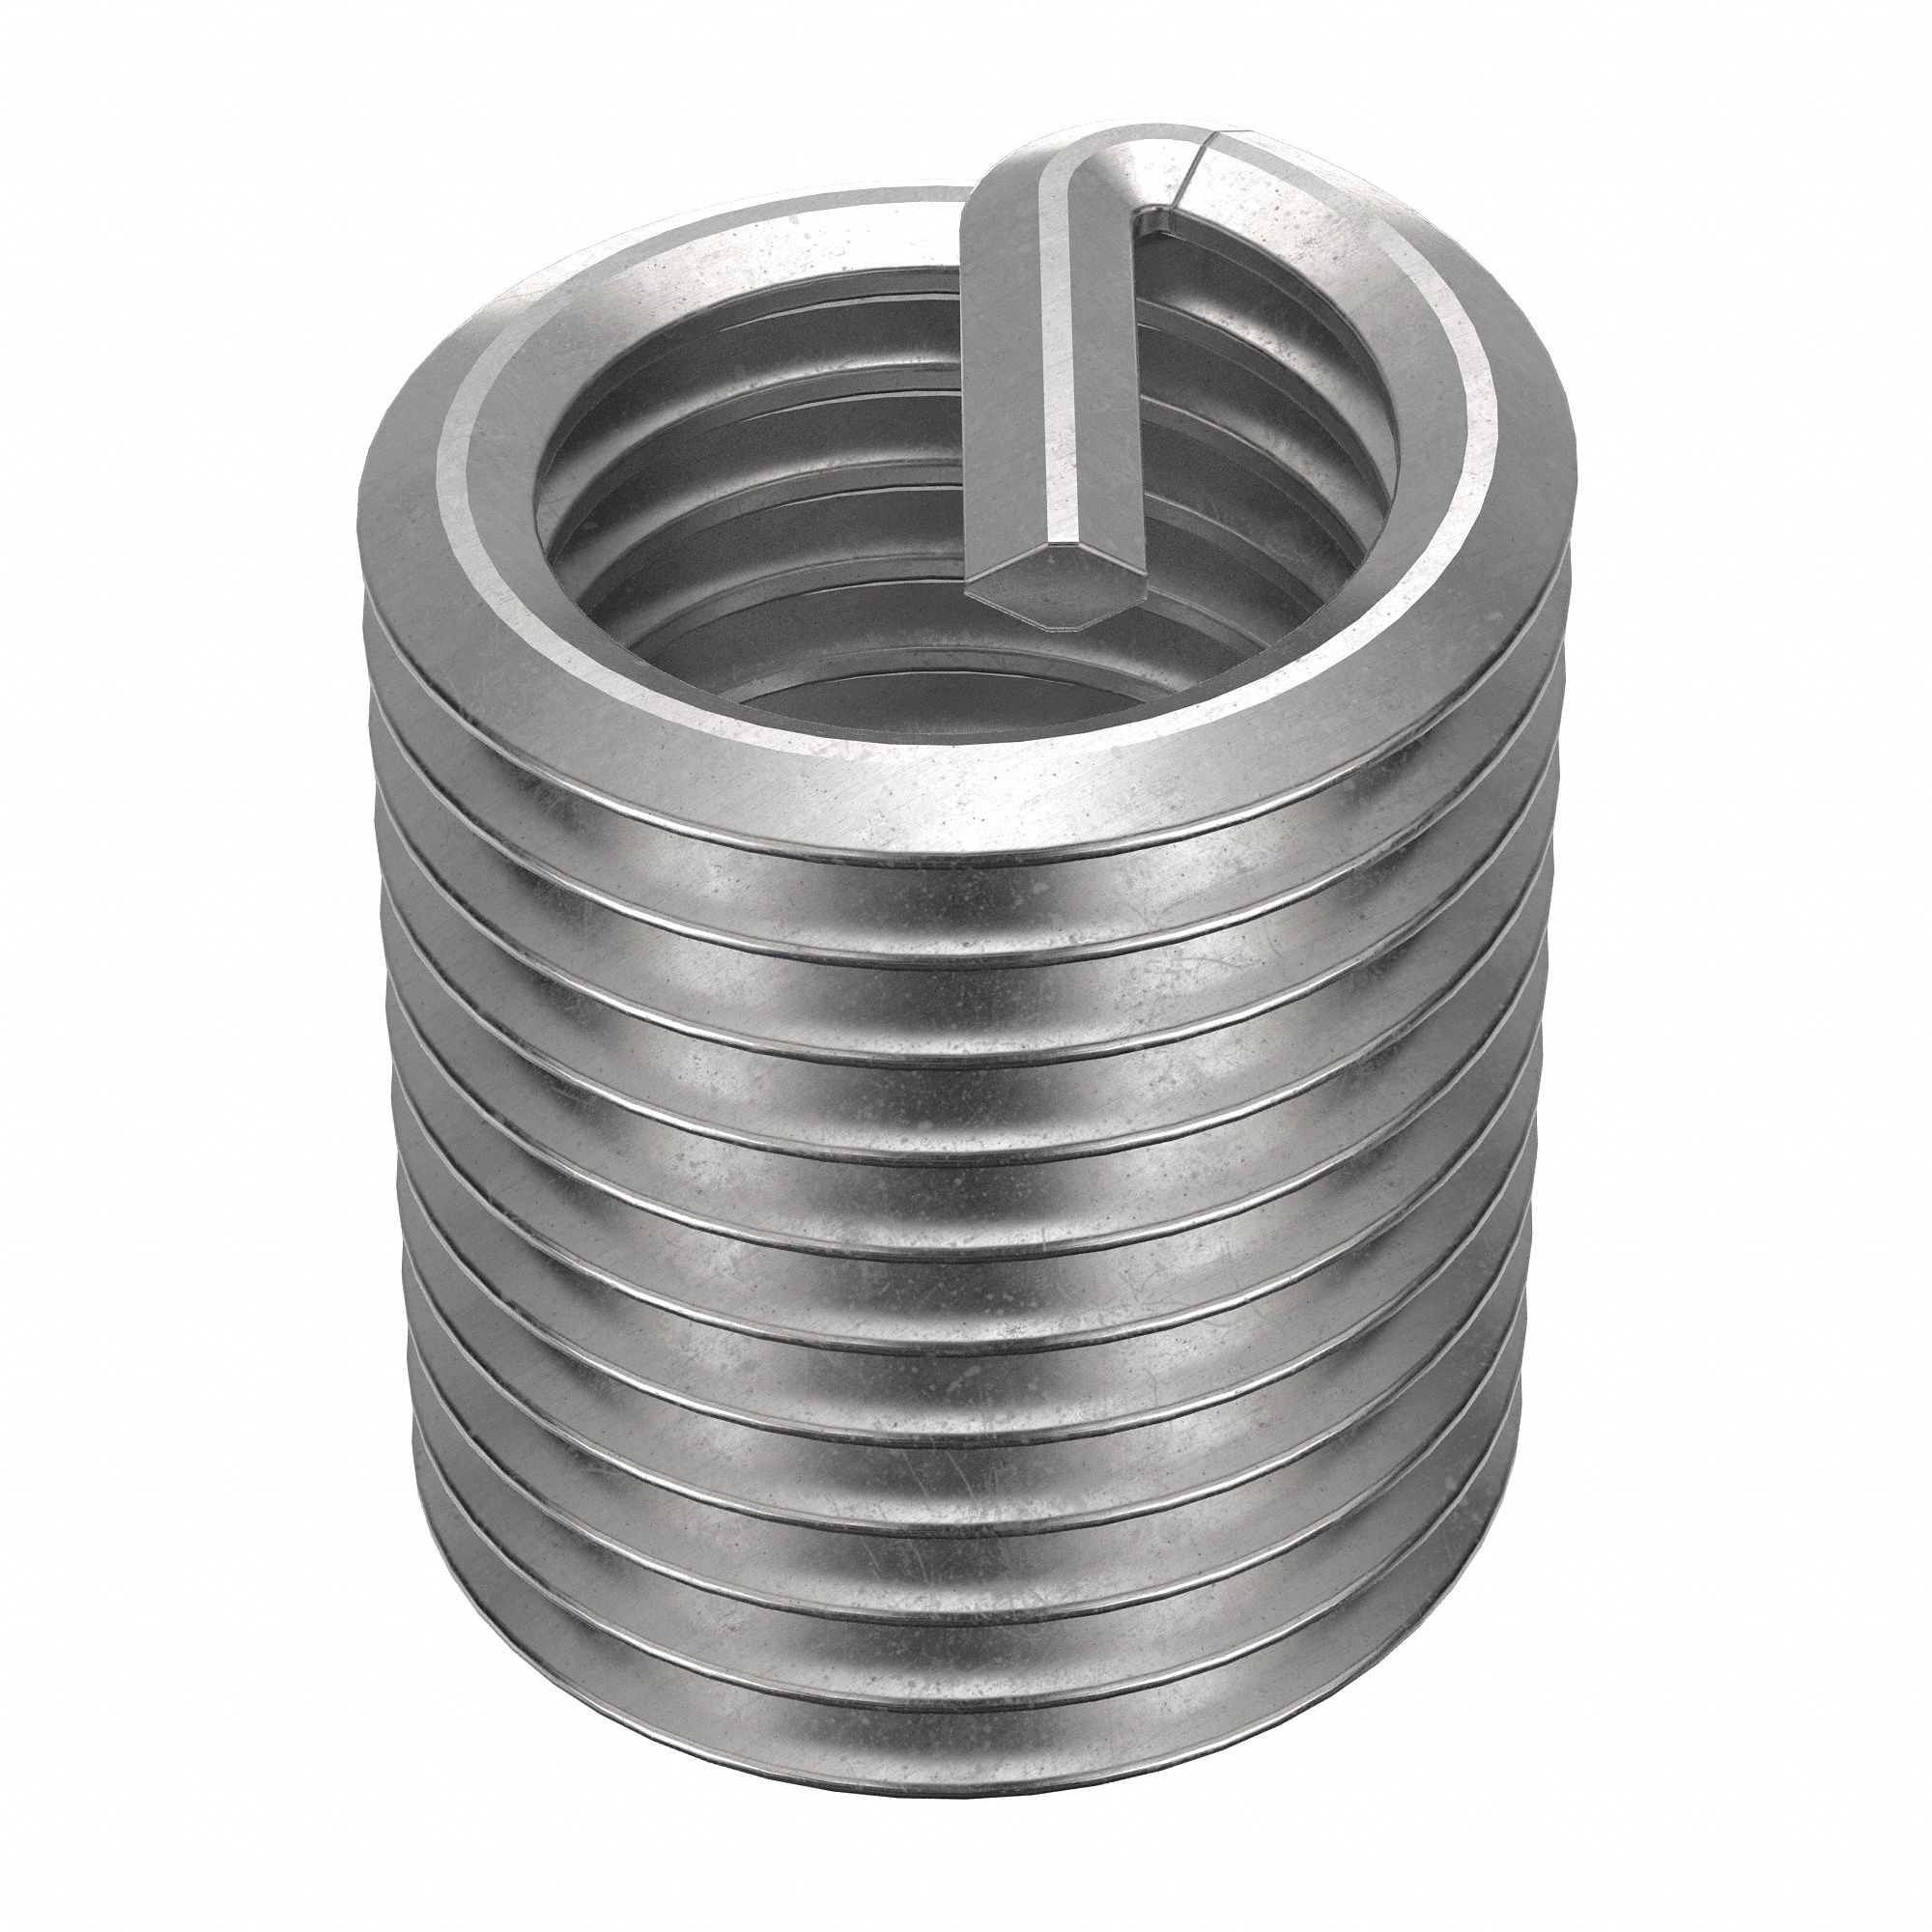 Stainless Steel Helicoil Thread Insert #8-32 x 1 Diameter Qty-25 